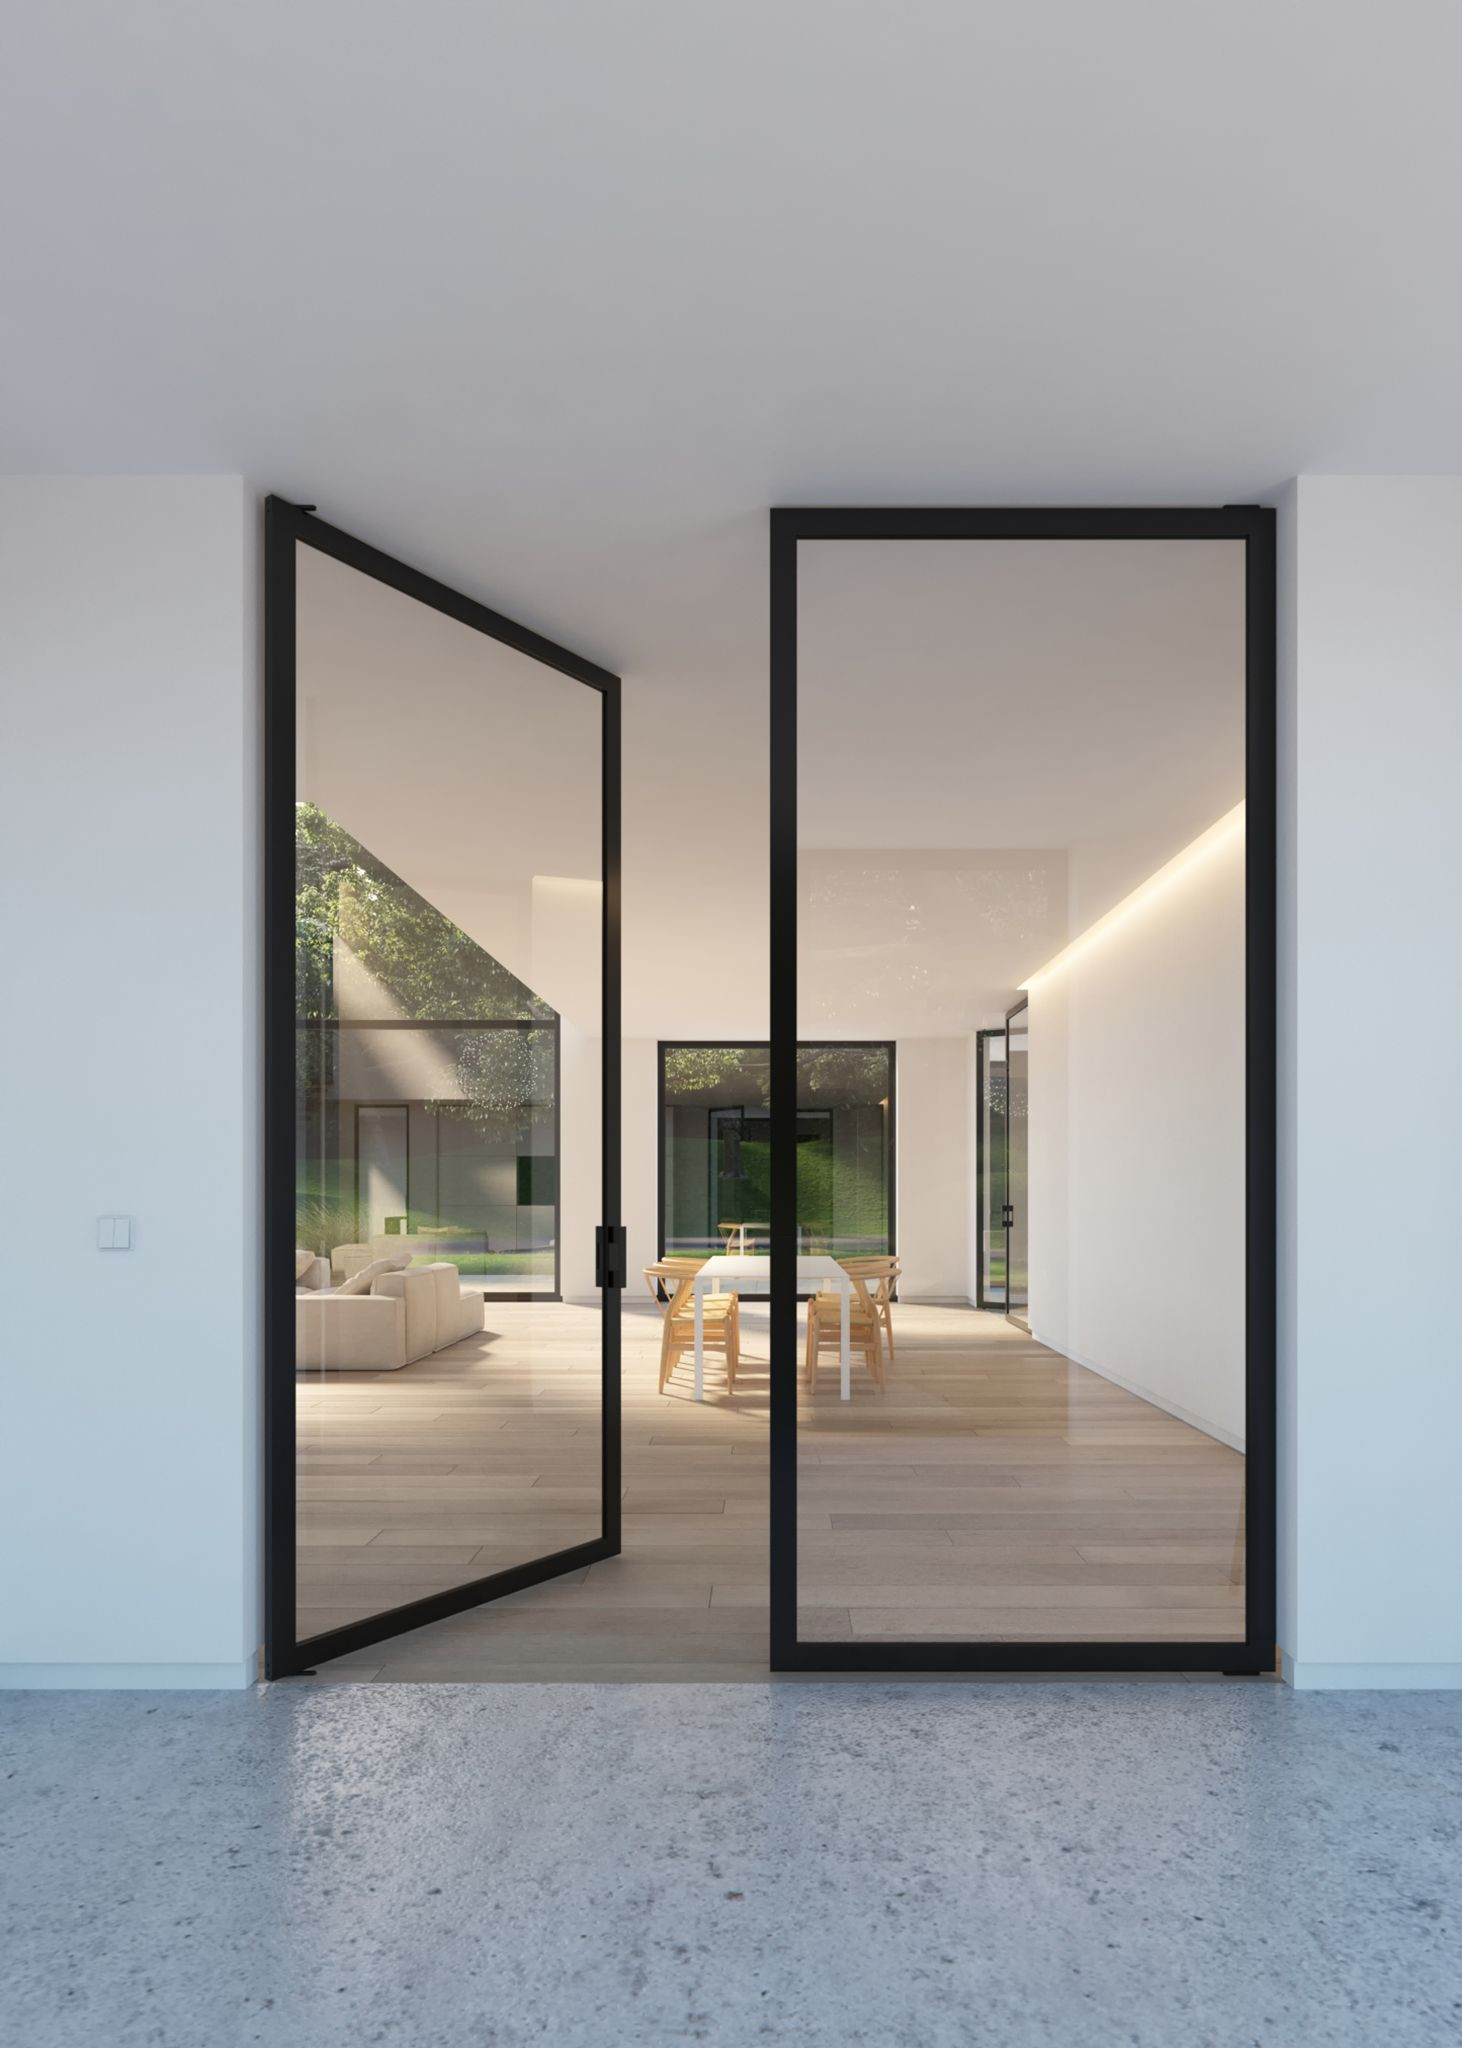 28 Fashionable Hardwood Floor Transition to Sliding Door 2024 free download hardwood floor transition to sliding door of double glass door with steel look frames portapivot h o m e pertaining to double glass door with steel look frames portapivot internal glass slid